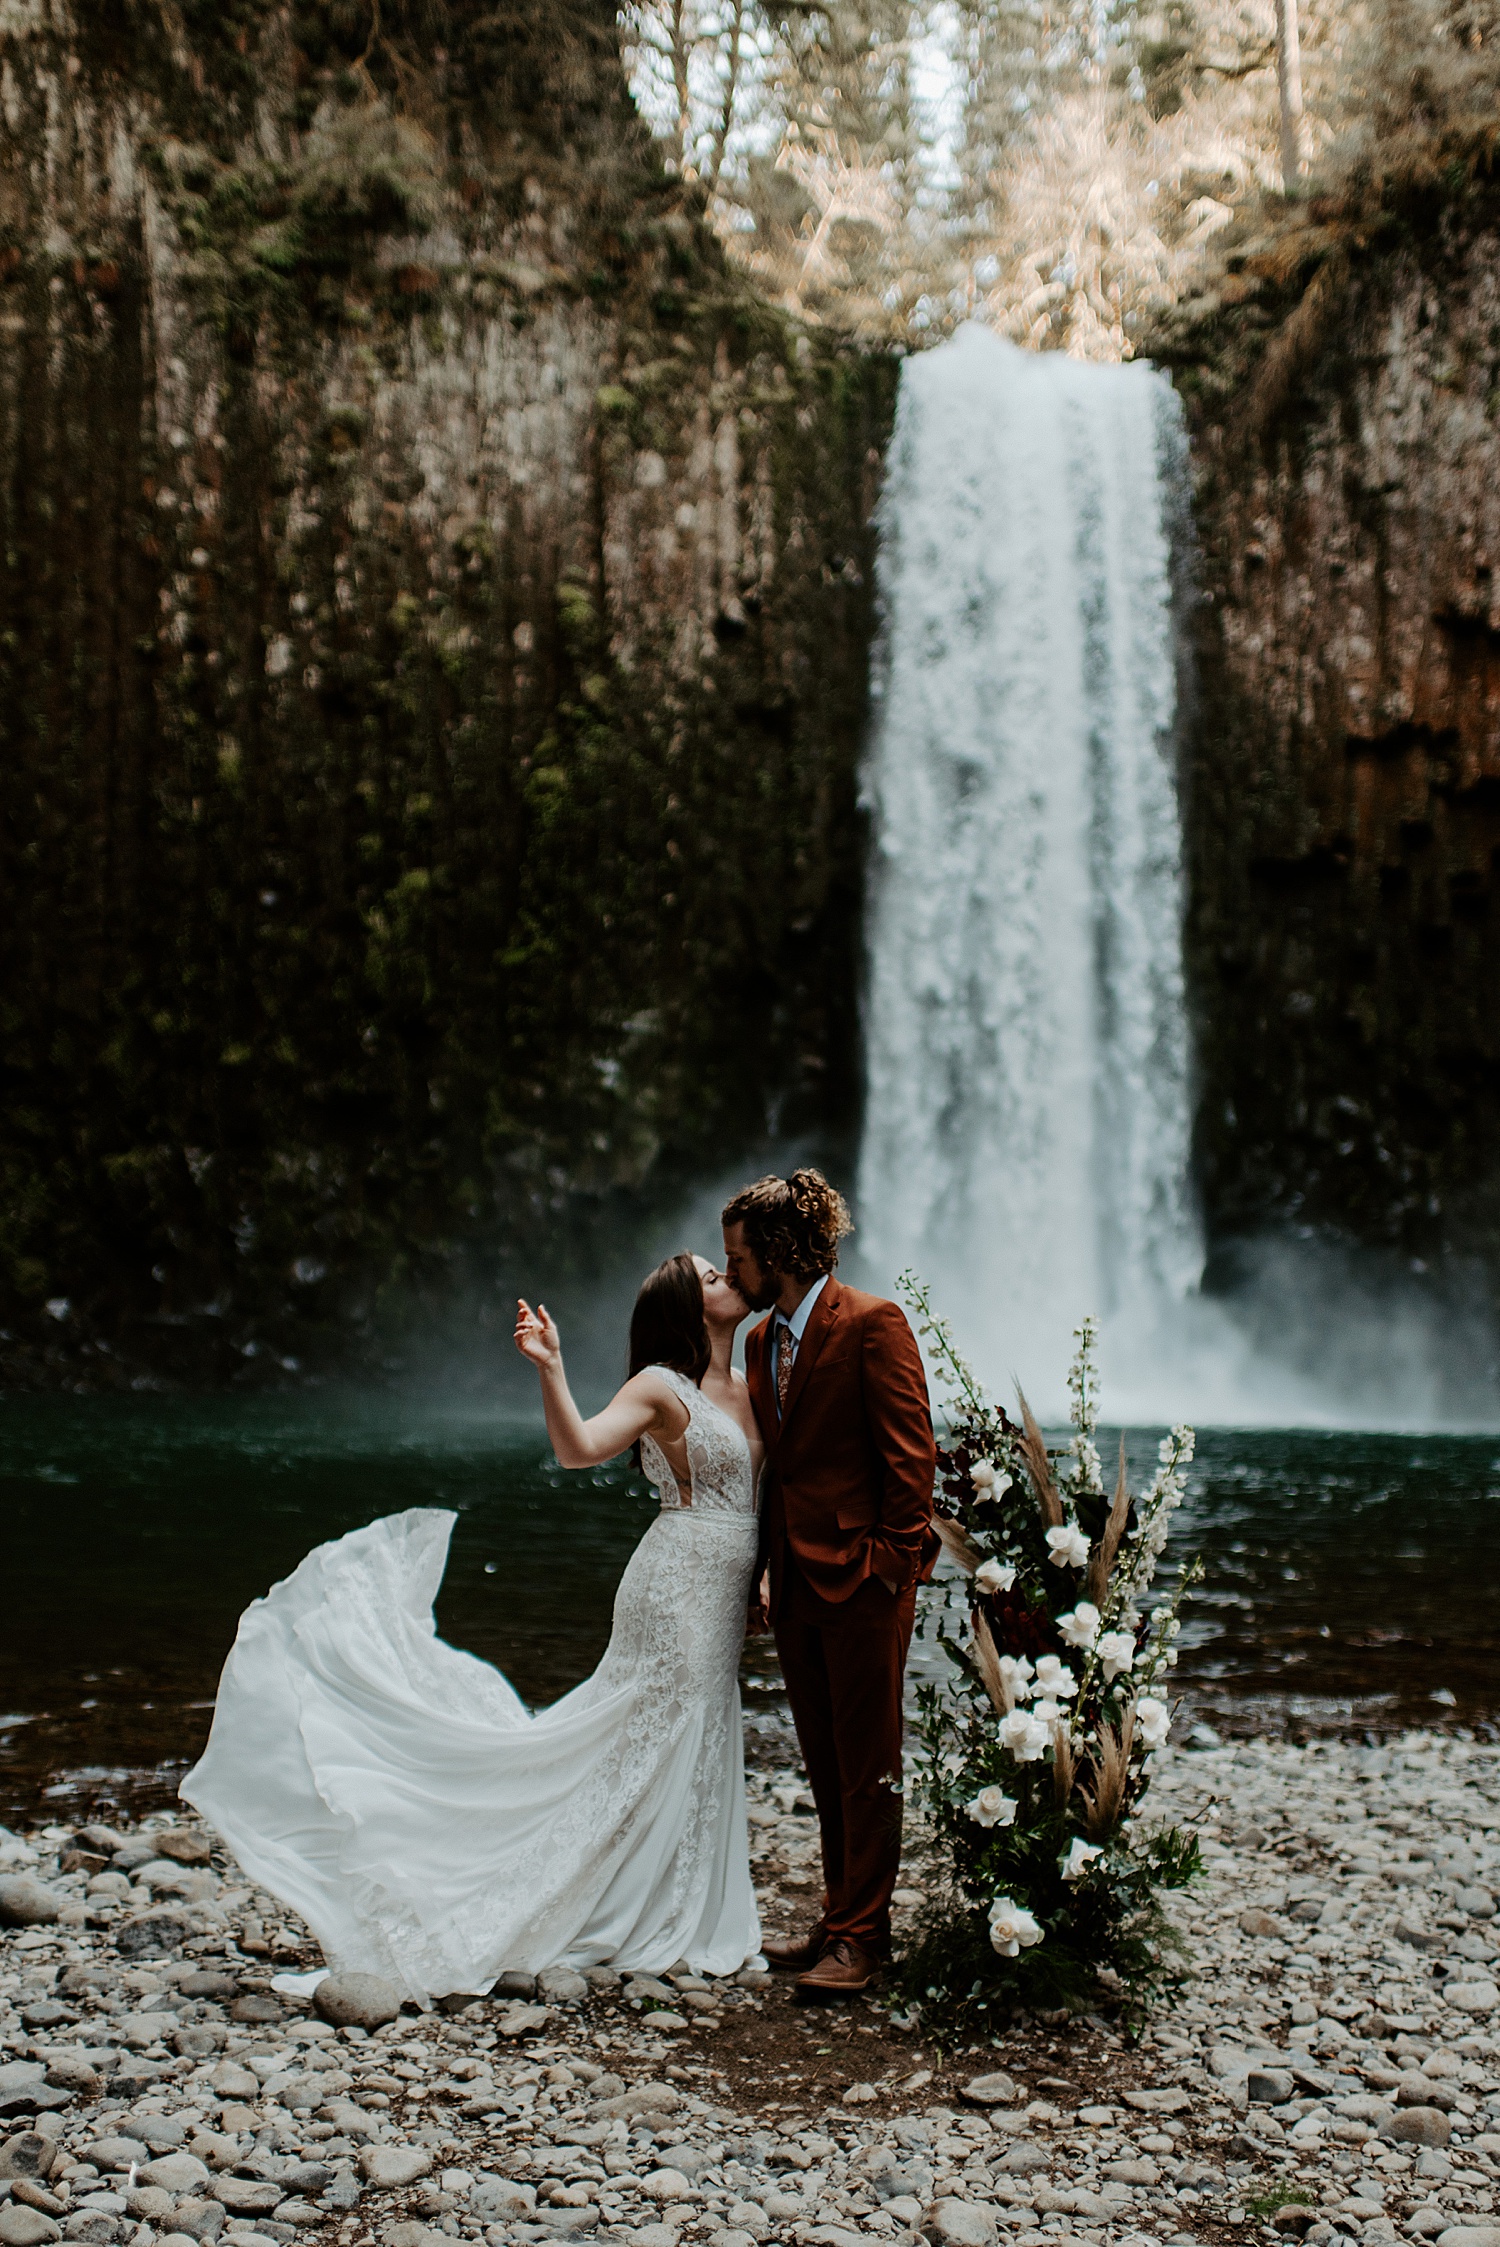 Groom kissing his bride in front of a waterfall while she flicks her boho wedding train in the air.